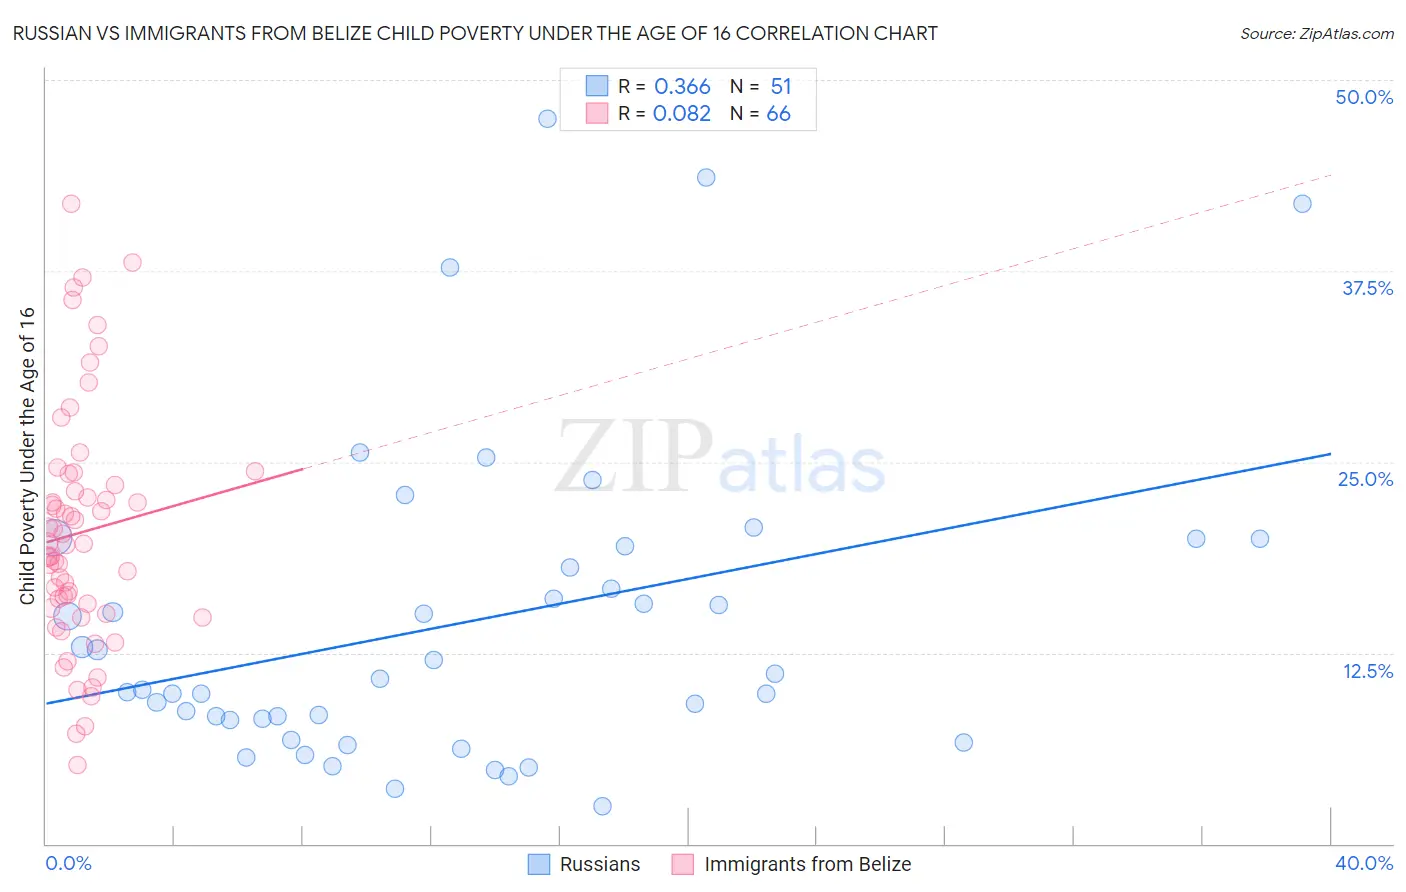 Russian vs Immigrants from Belize Child Poverty Under the Age of 16